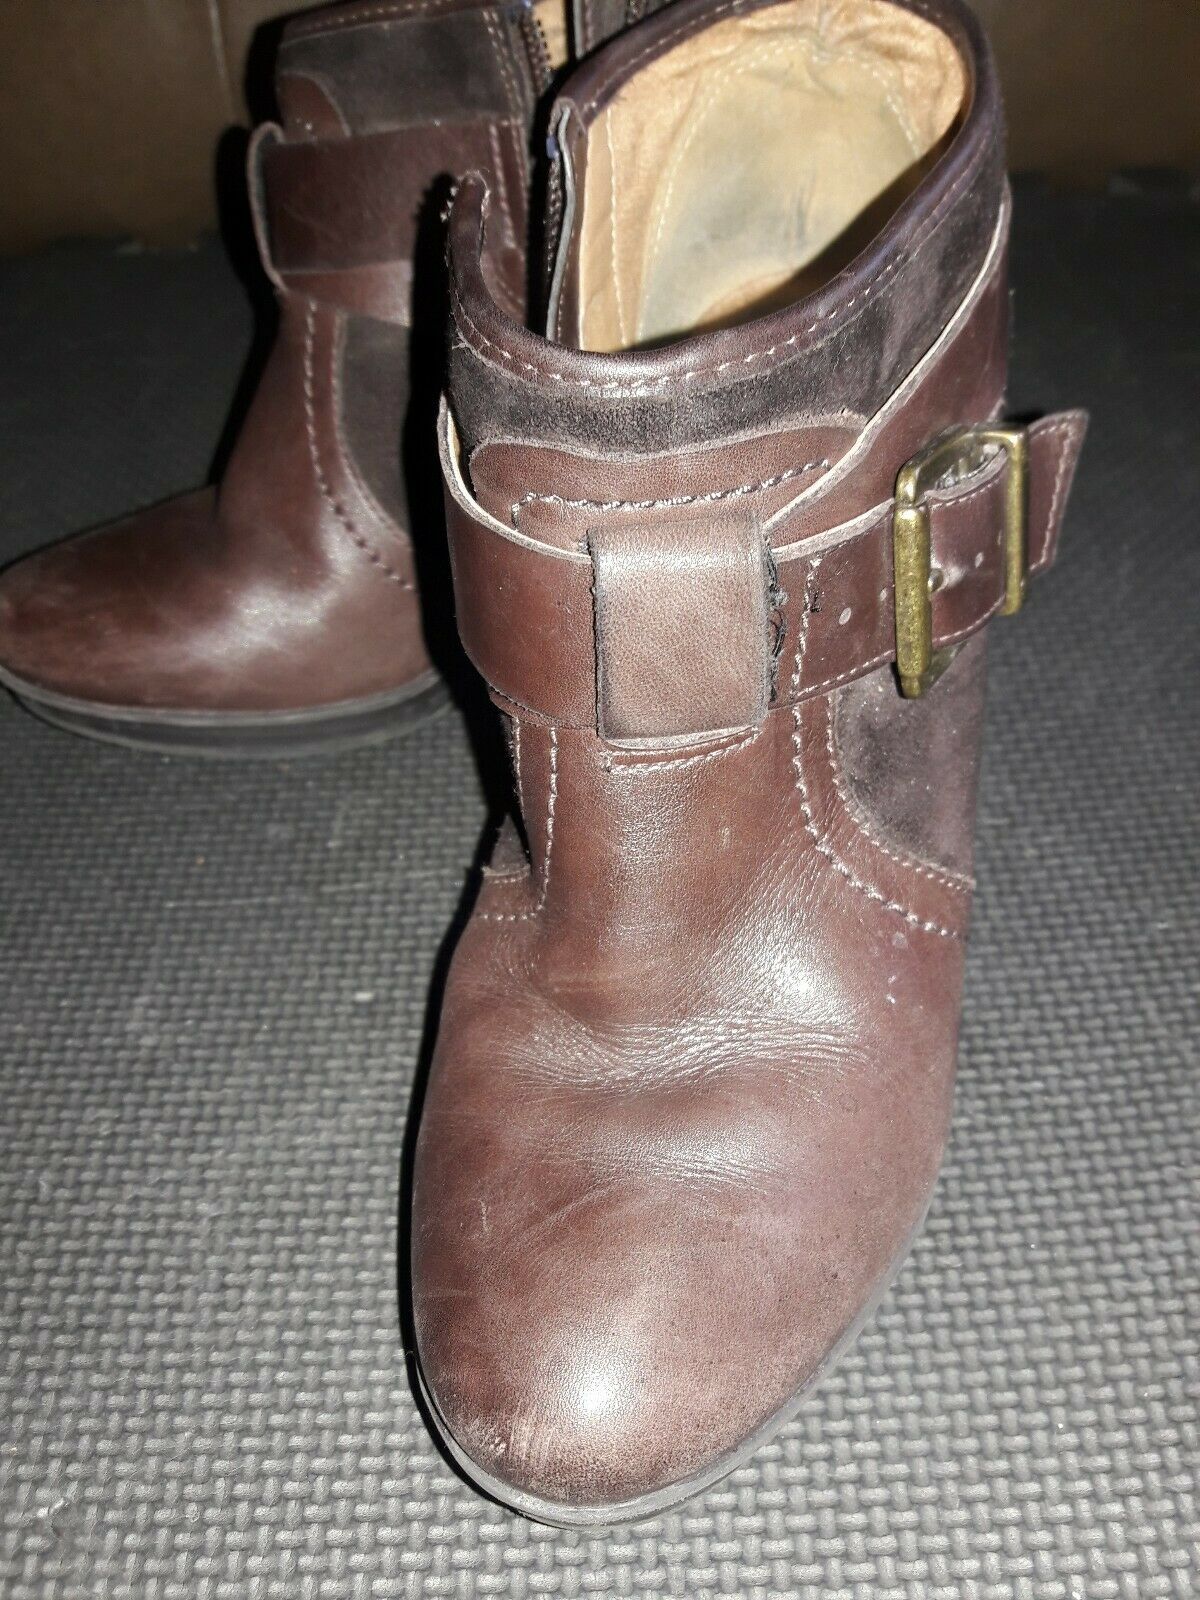 clarks boots size 6